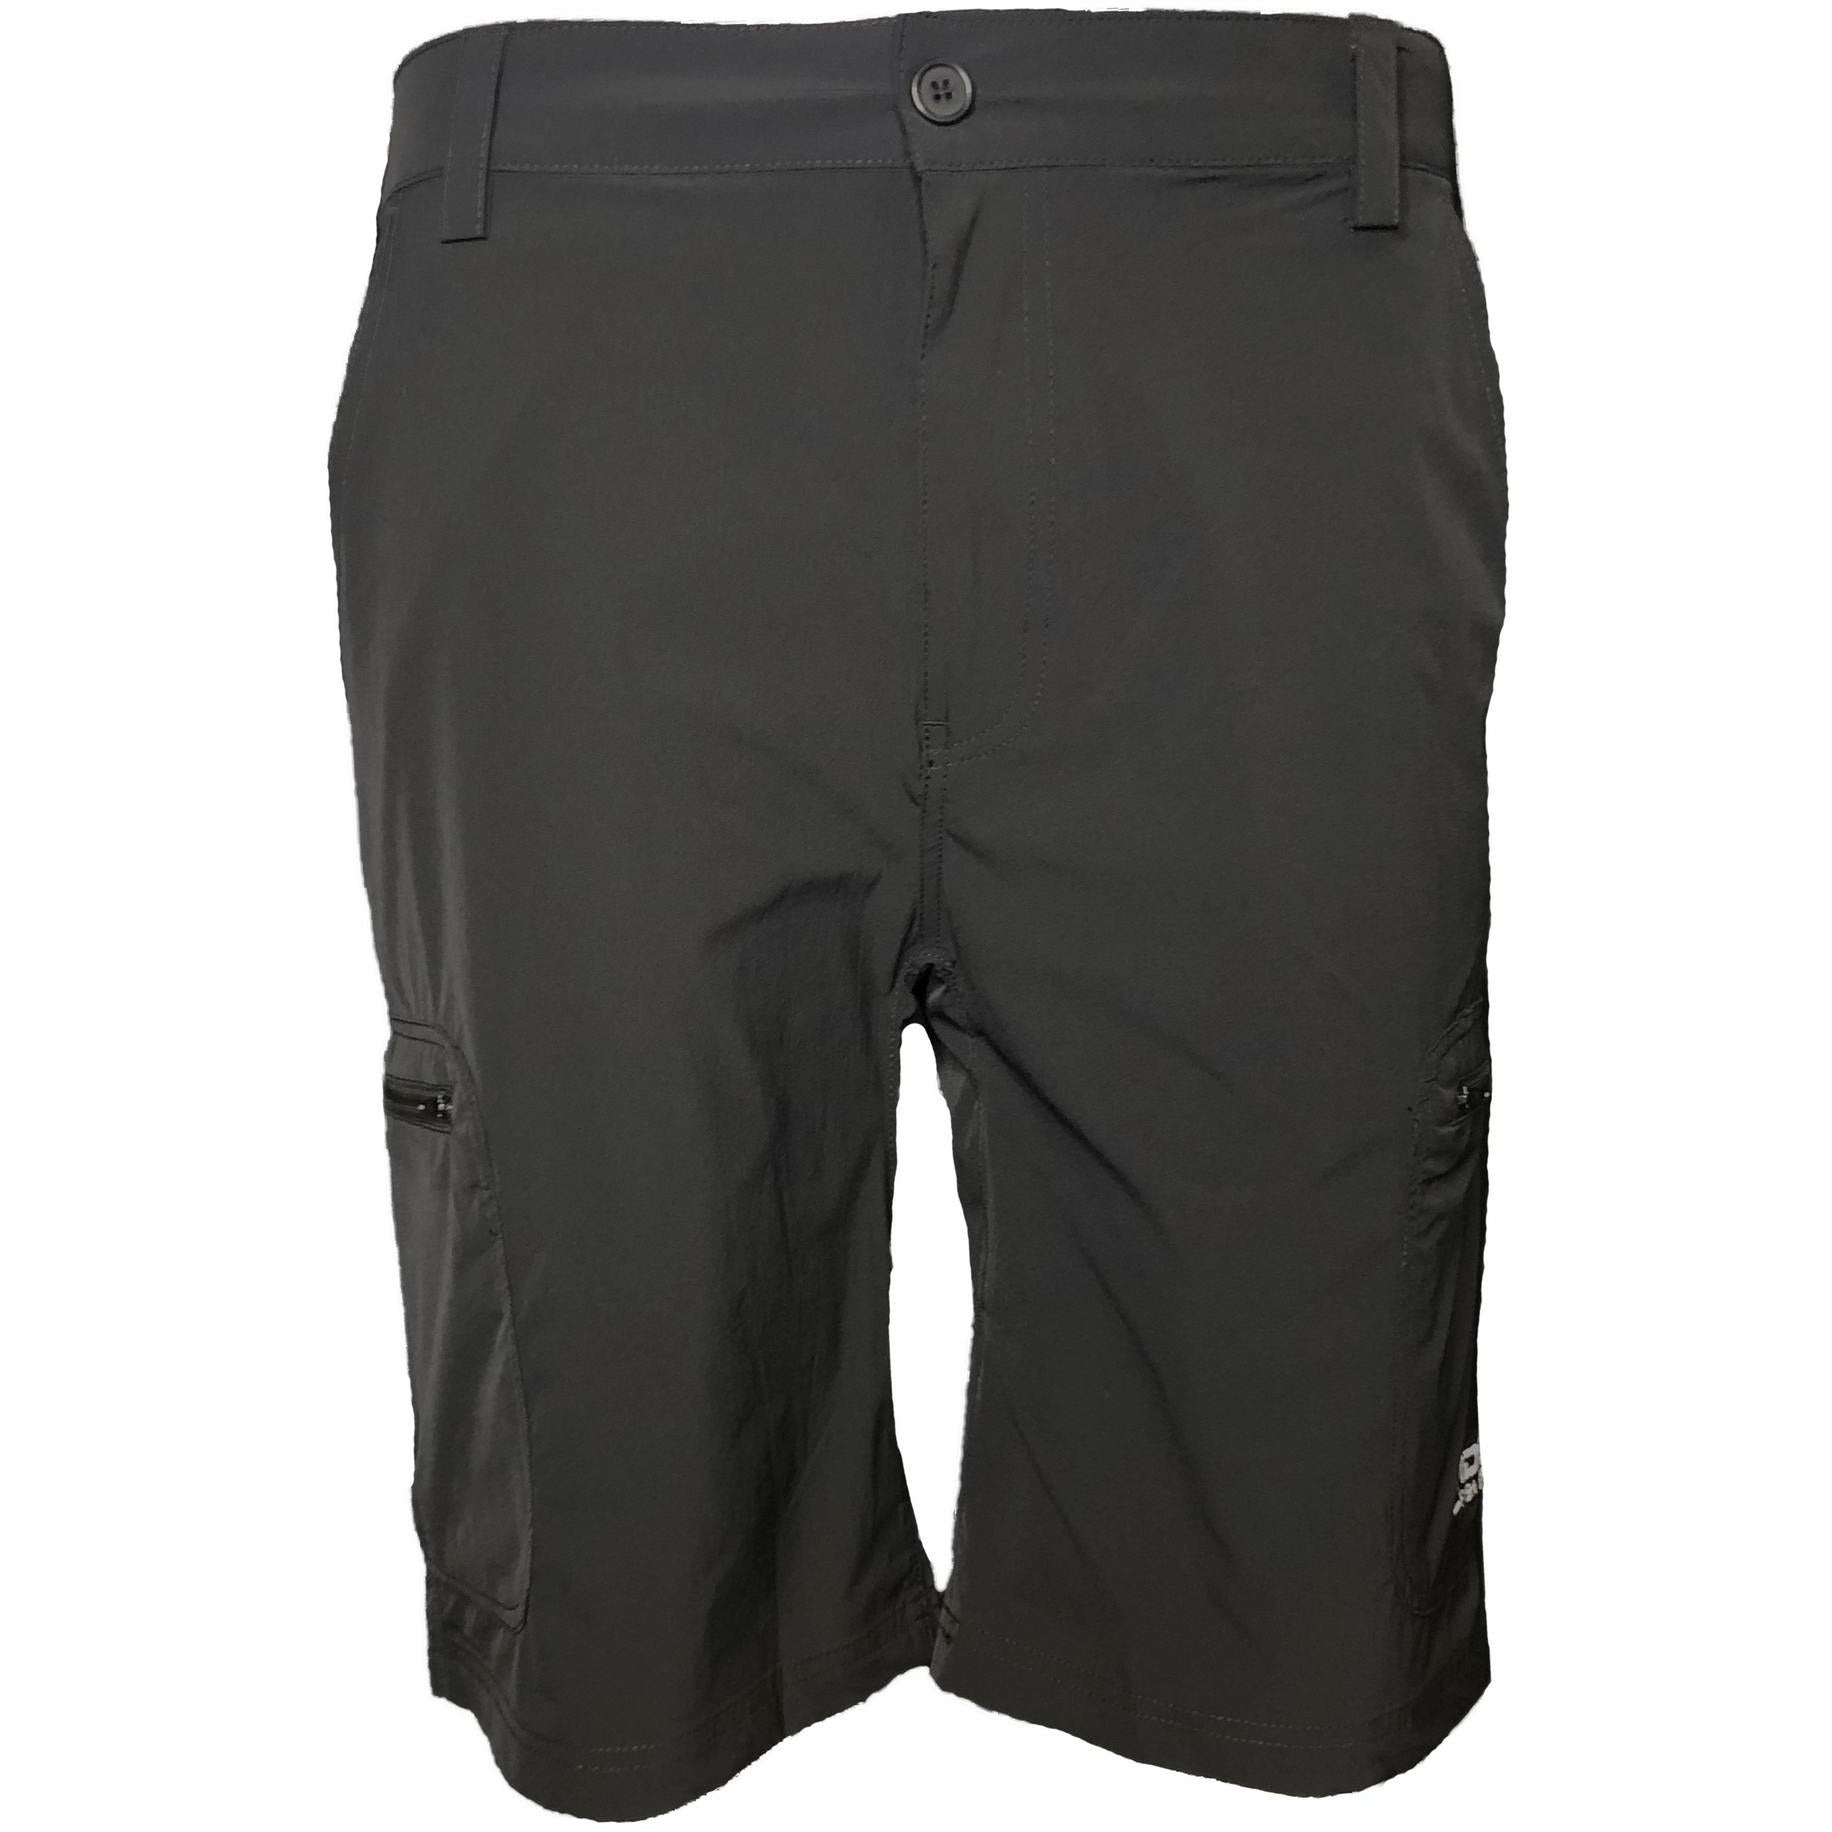 Hardcore Fish and Game Outrigger High Performance Fishing Shorts 30 / Black / No Rear Mesh